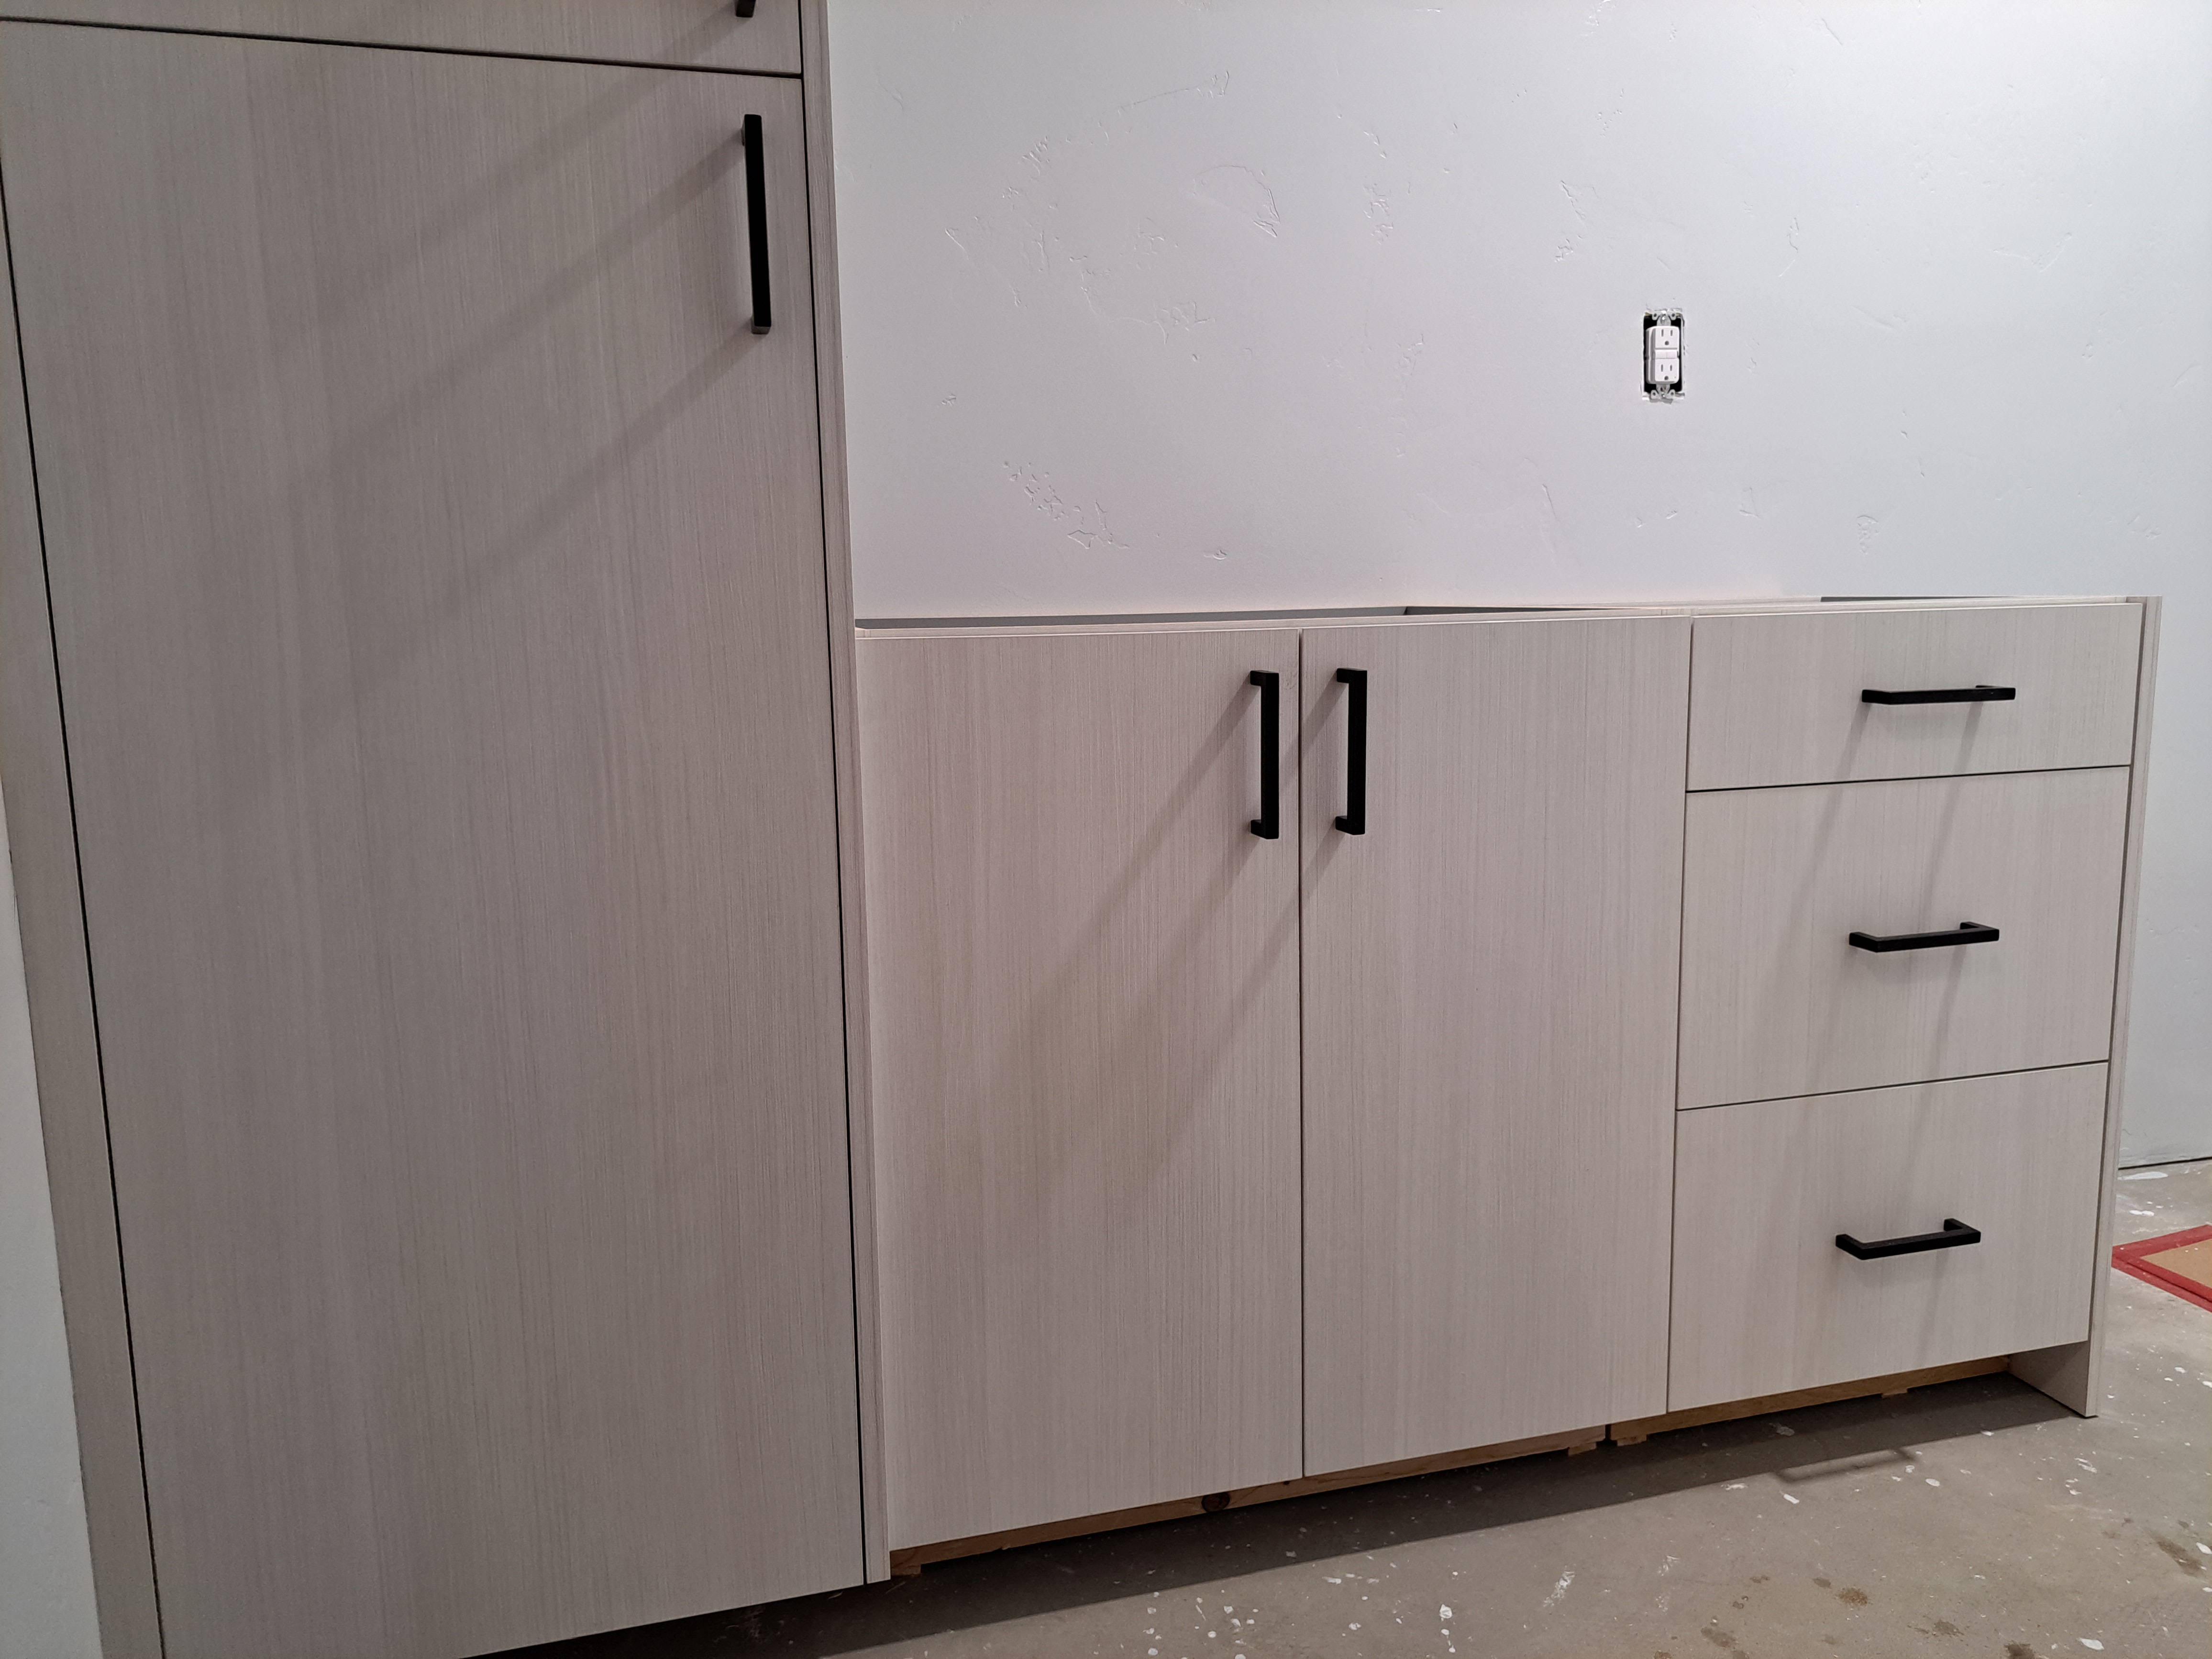 A white cabinet is being installed in a room.